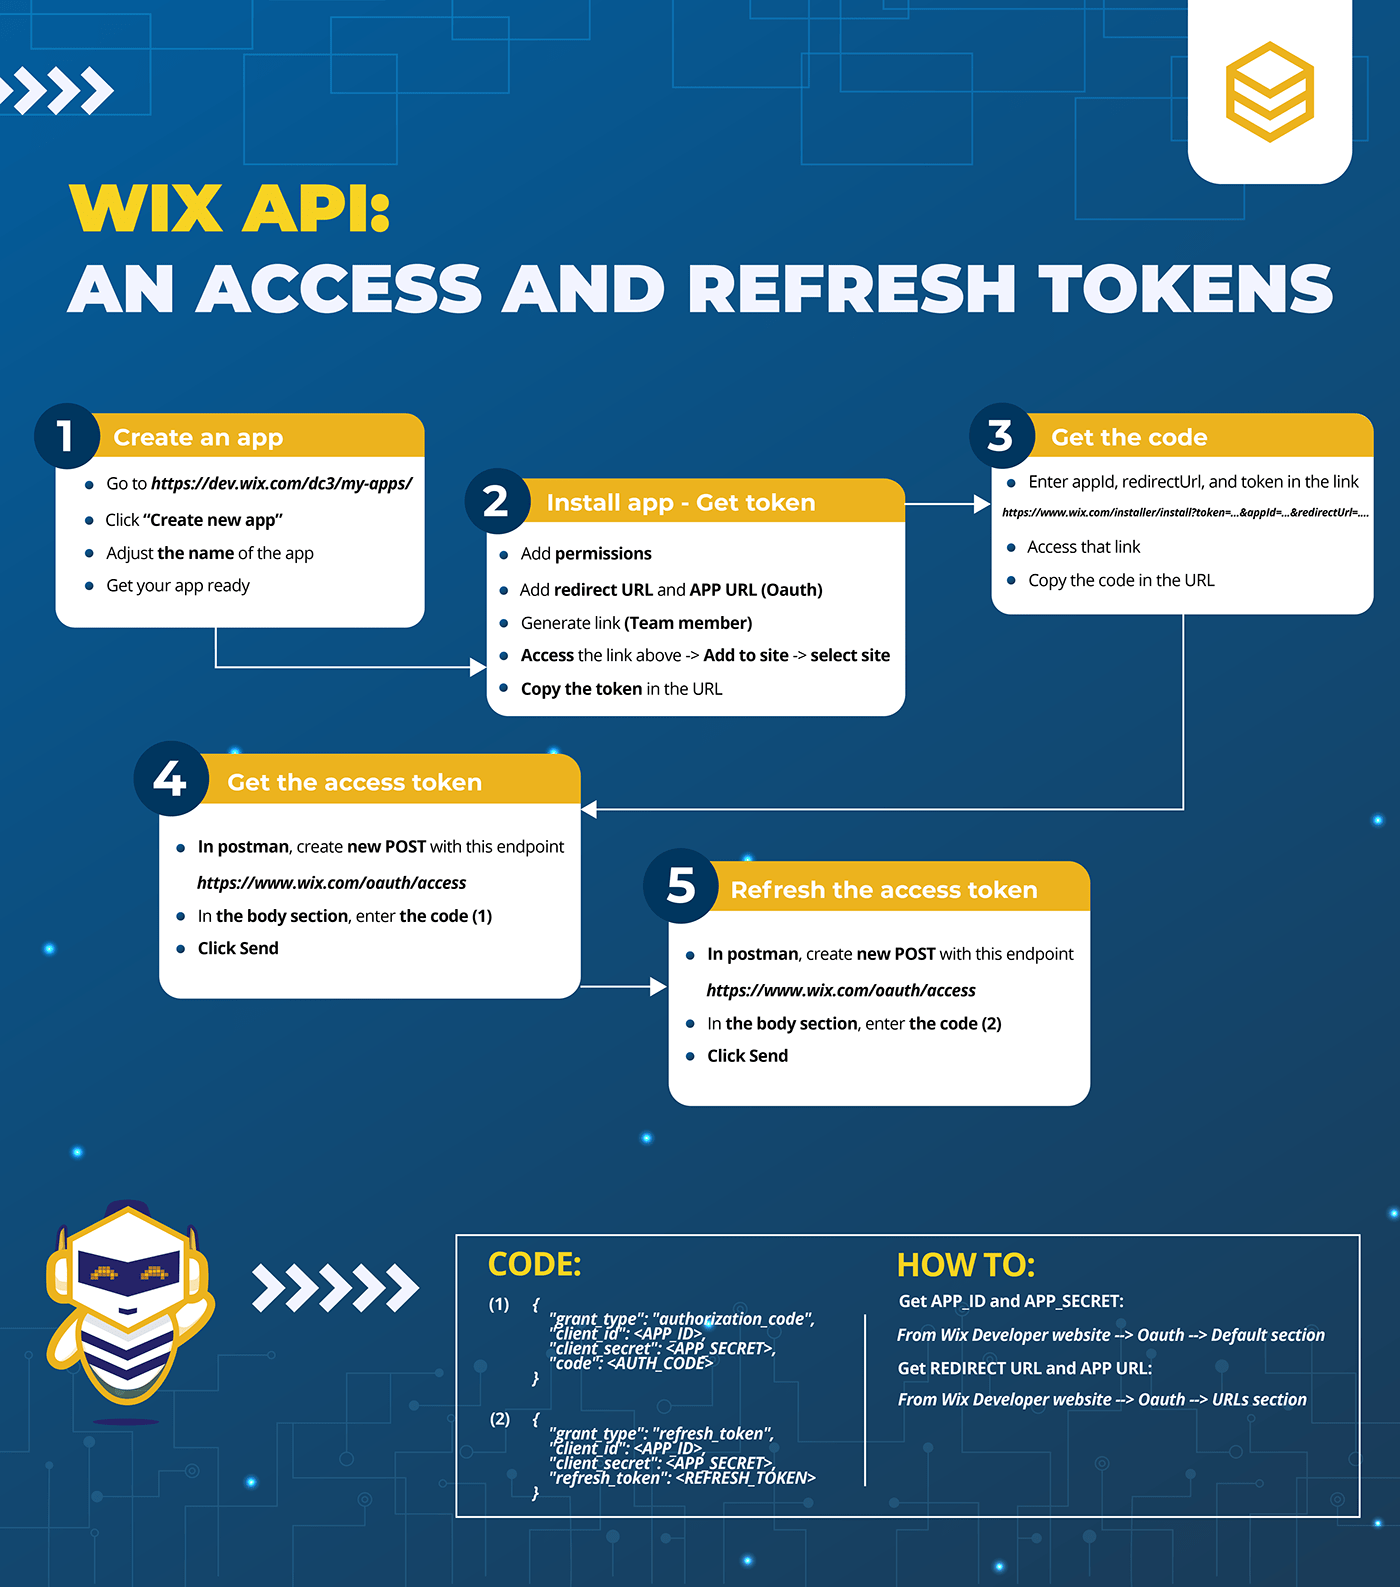 Wix API - How to get an access token and refresh the access token